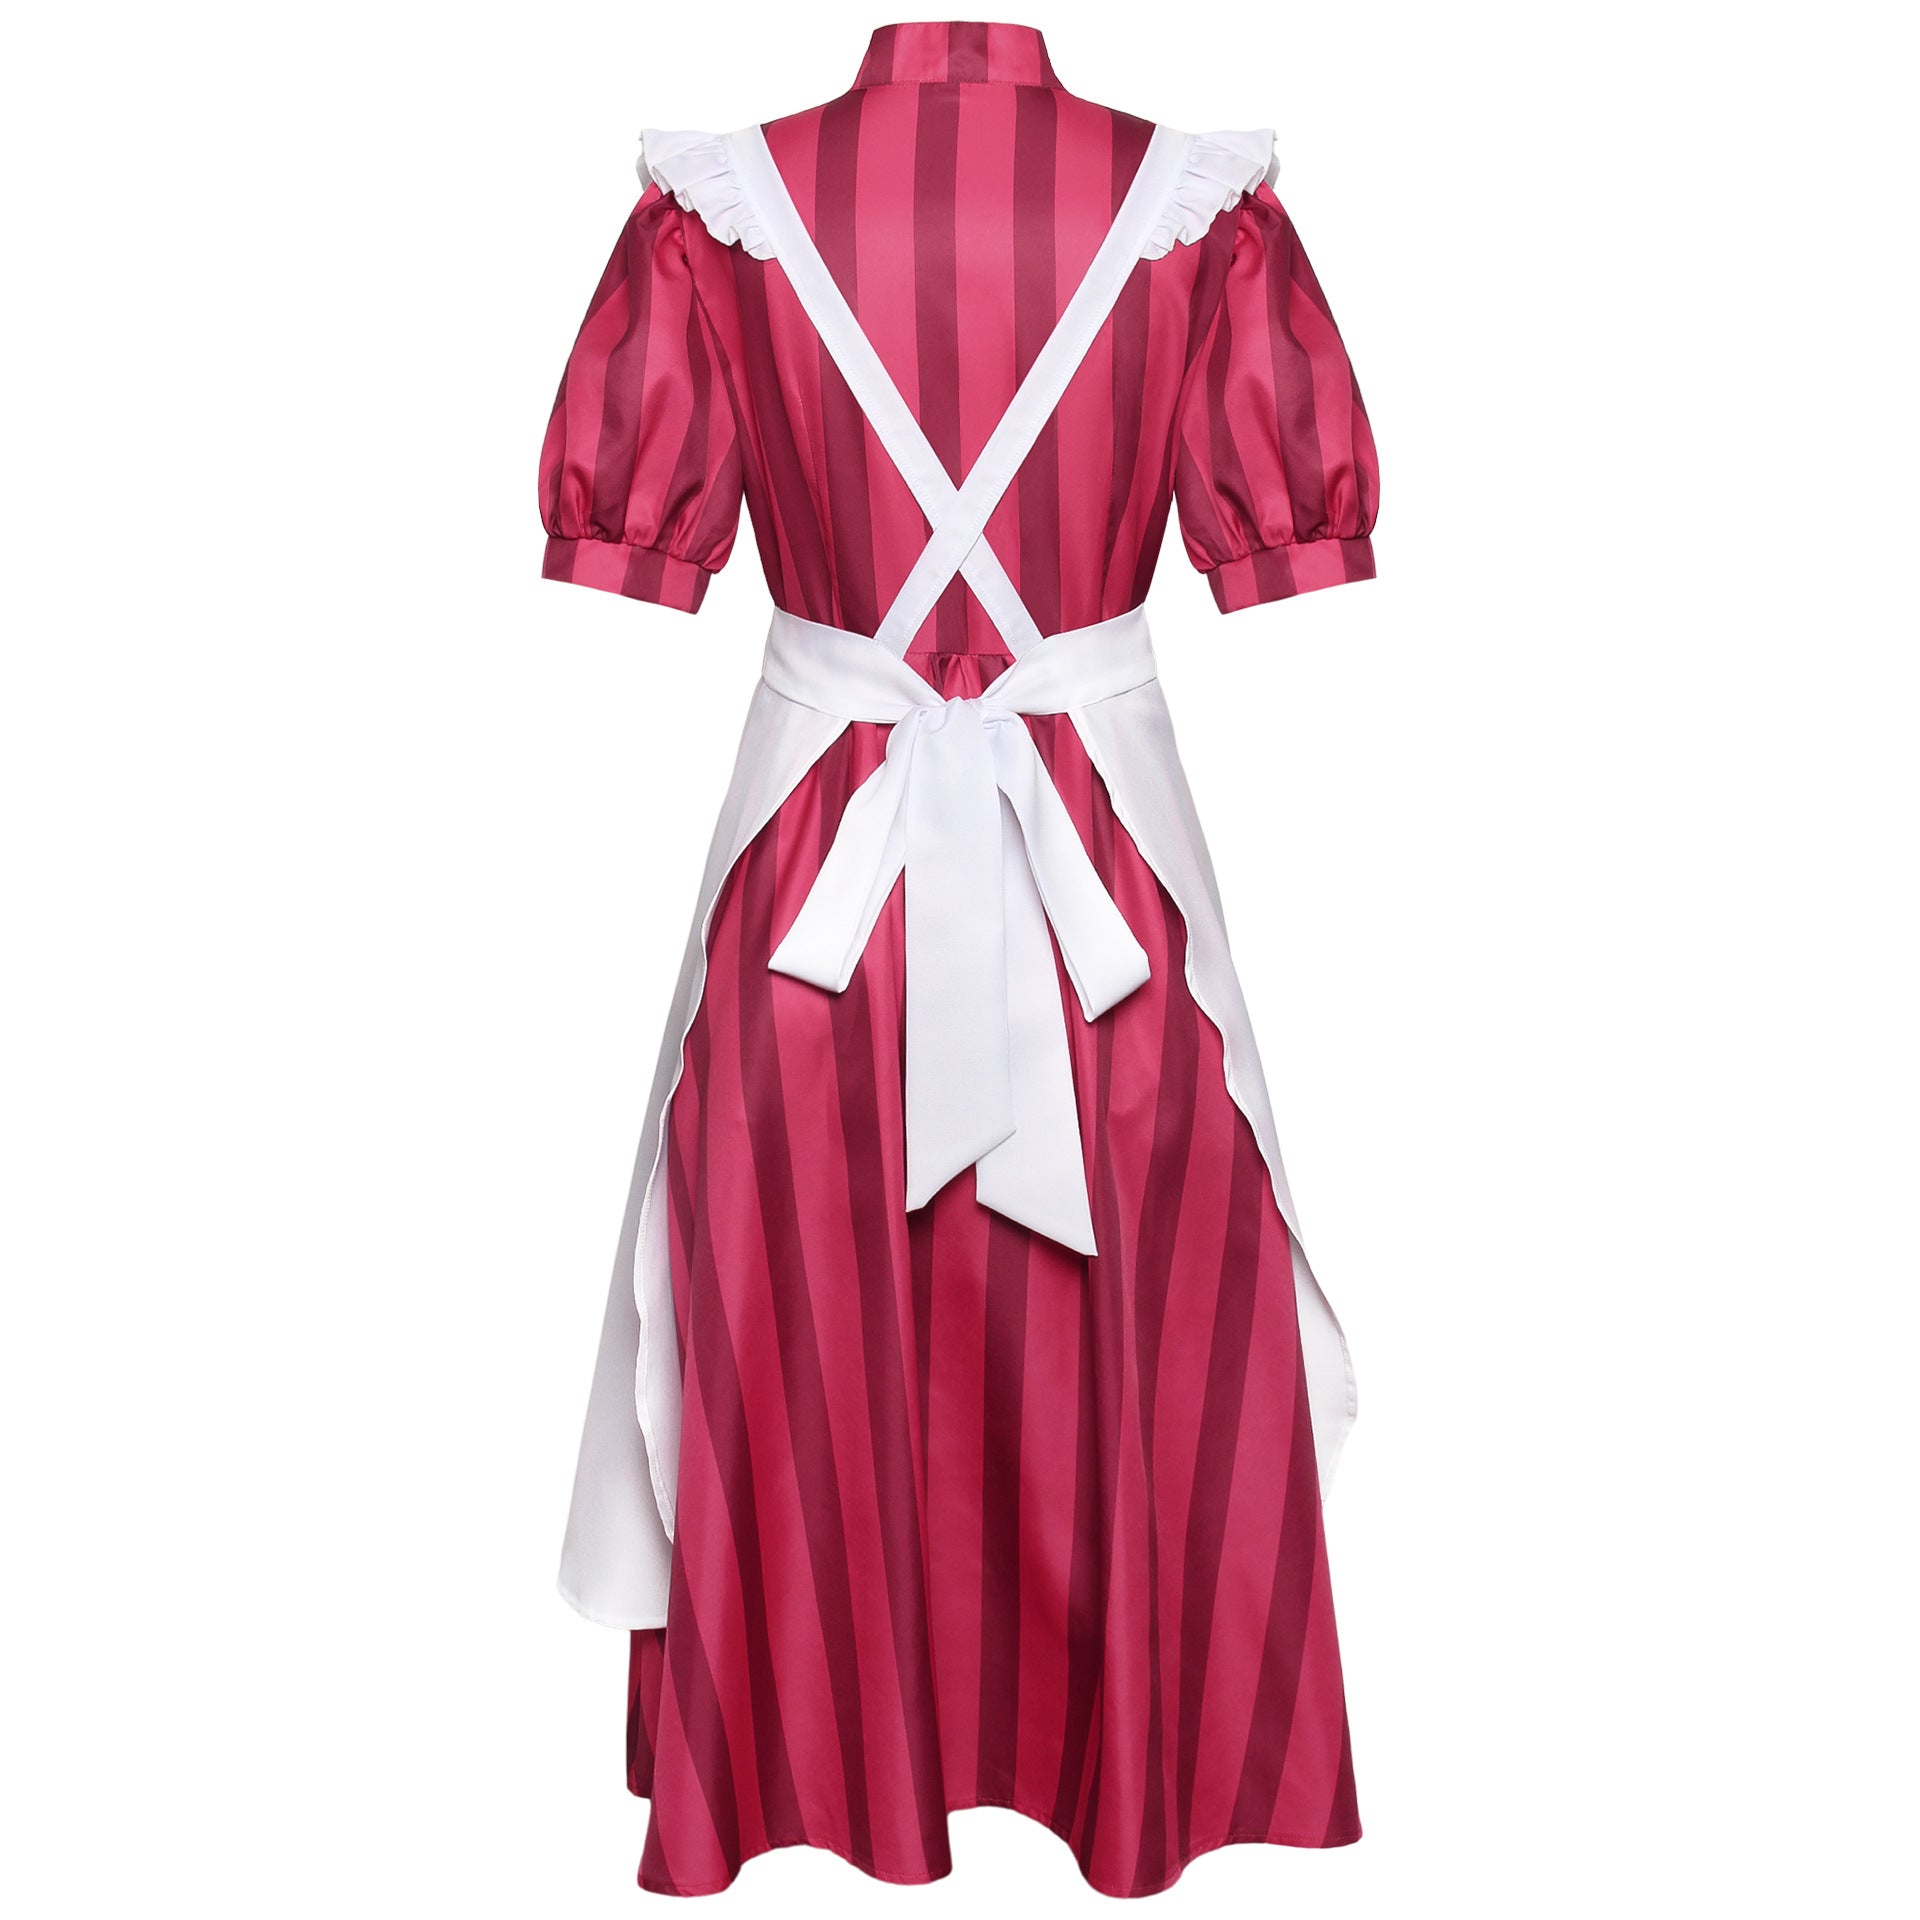 Lady Himi Cosplay Costume Maid Dress with Apron How Do You Live Halloween Dress Up Suit